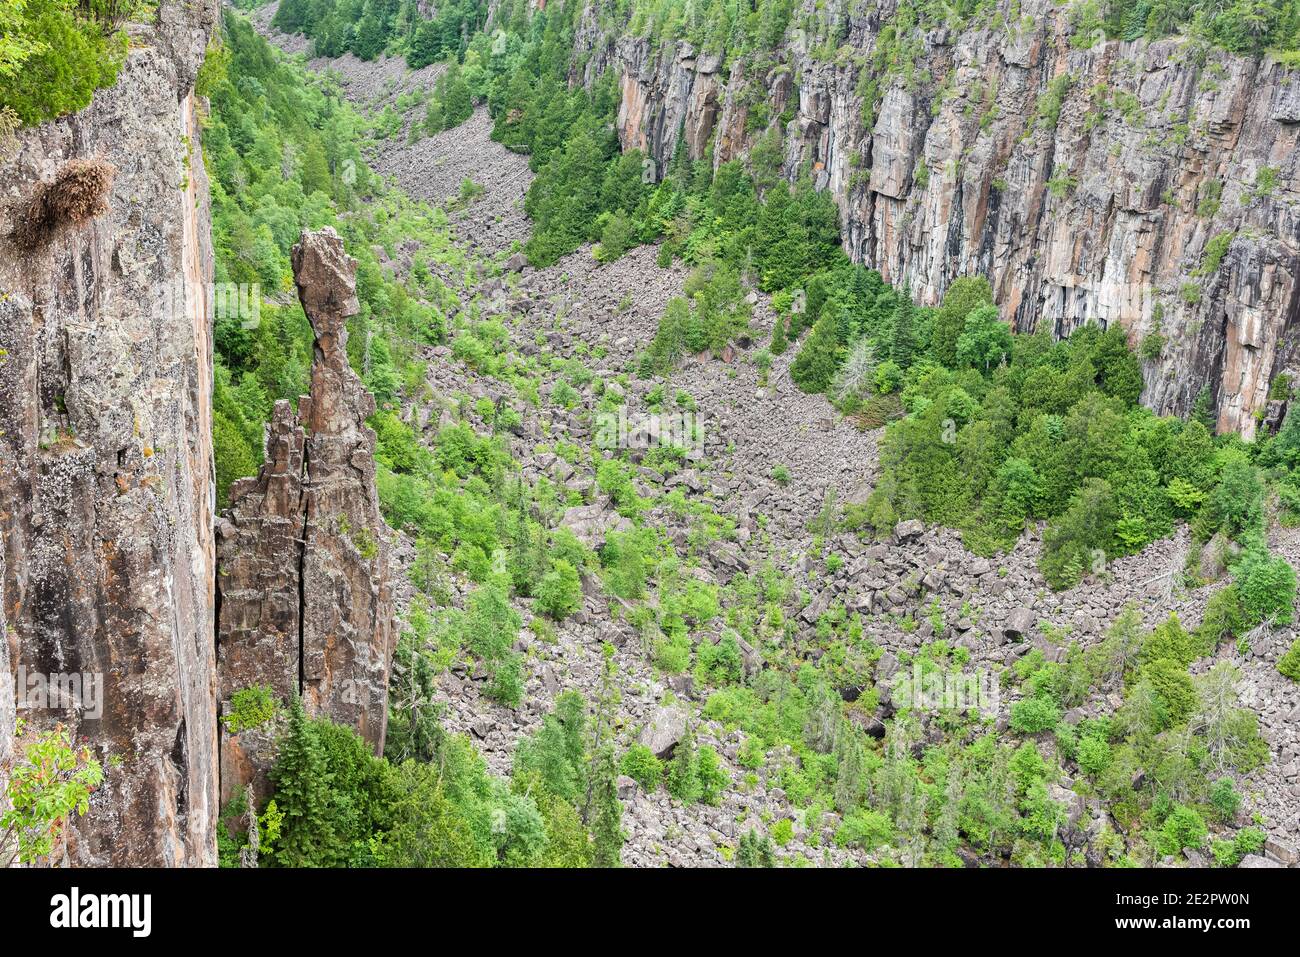 Ouimet Canyon provincial park, in the area of Thunder Bay, in Ontario, Canada. Stock Photo